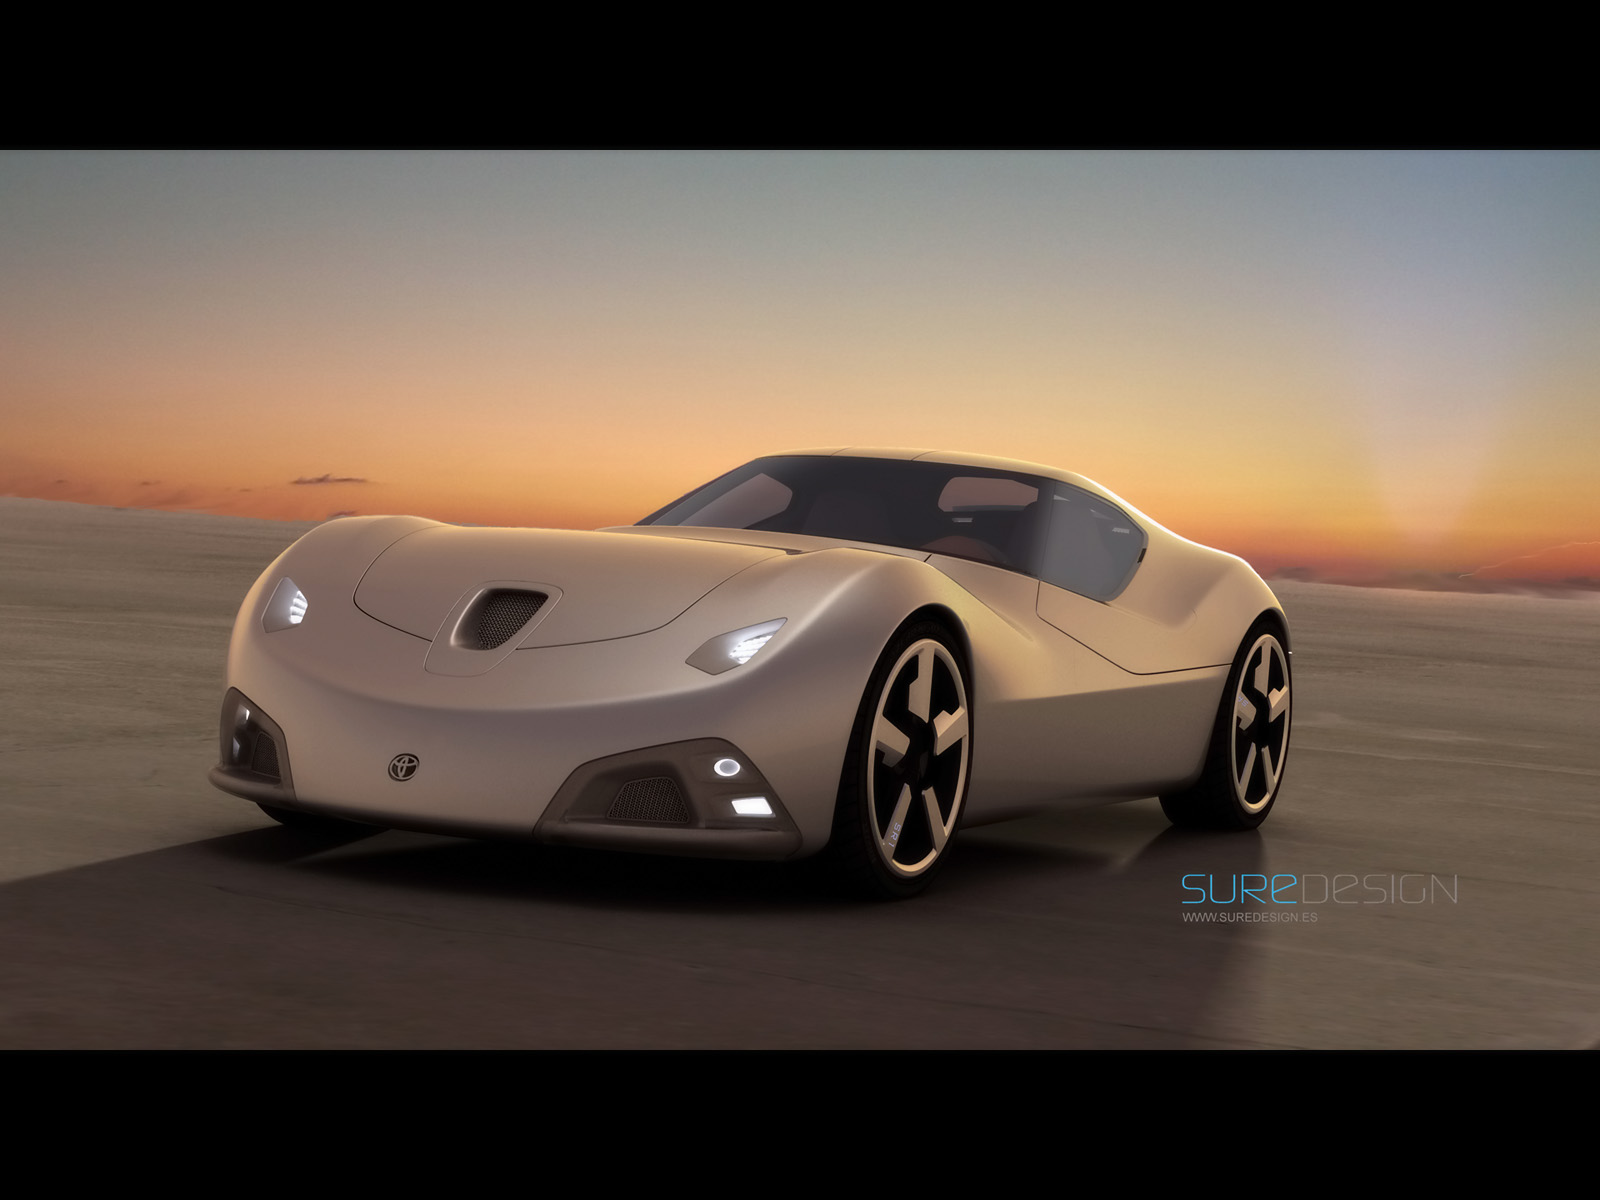 Top 20 Best Toyota Cars Wallpapers Gallery. - Original Preview ...